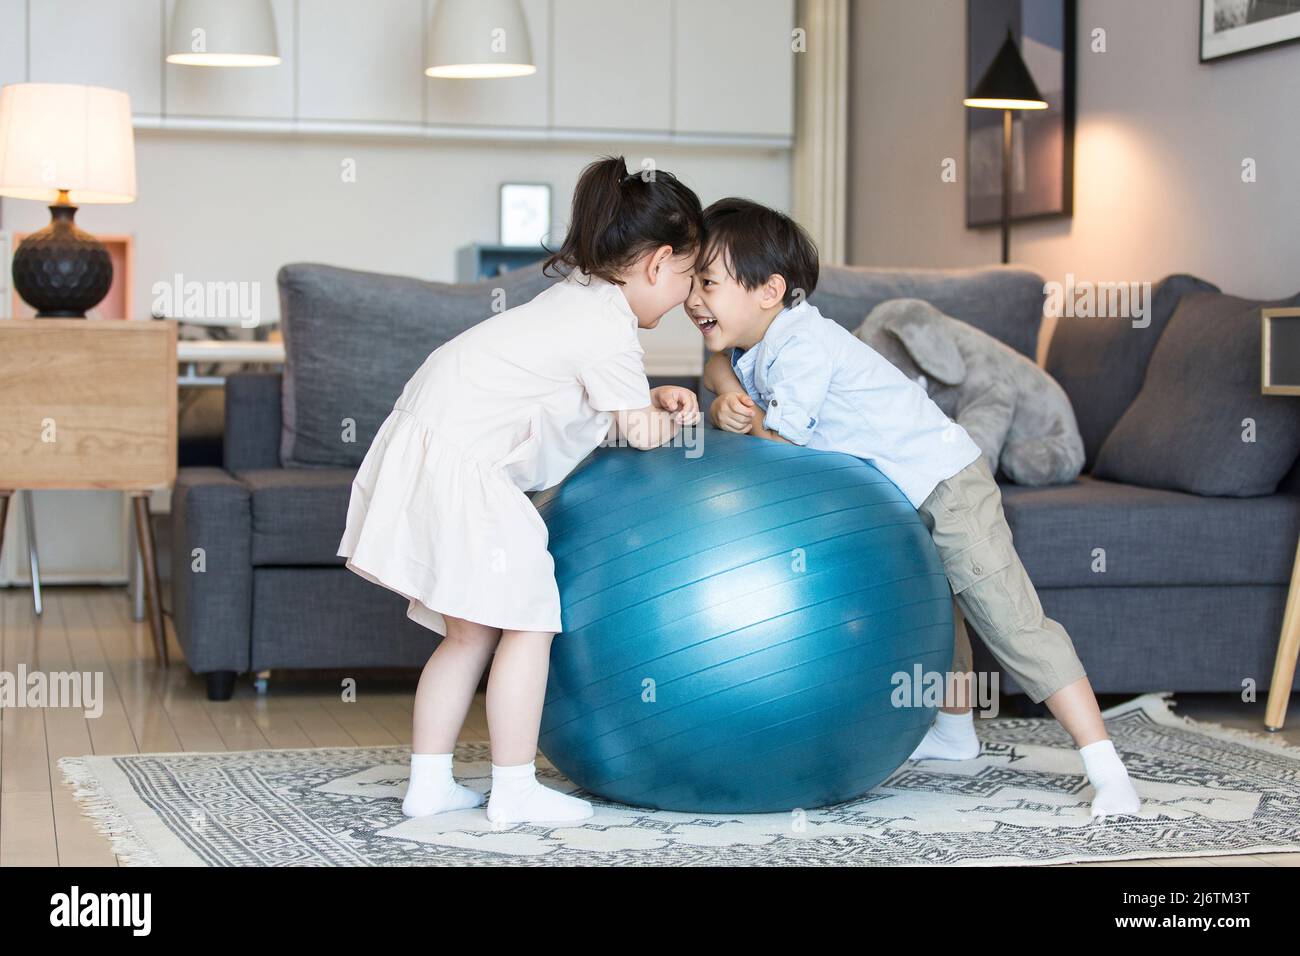 A boy and a girl playing intimately in the living room of their home - stock photo Stock Photo